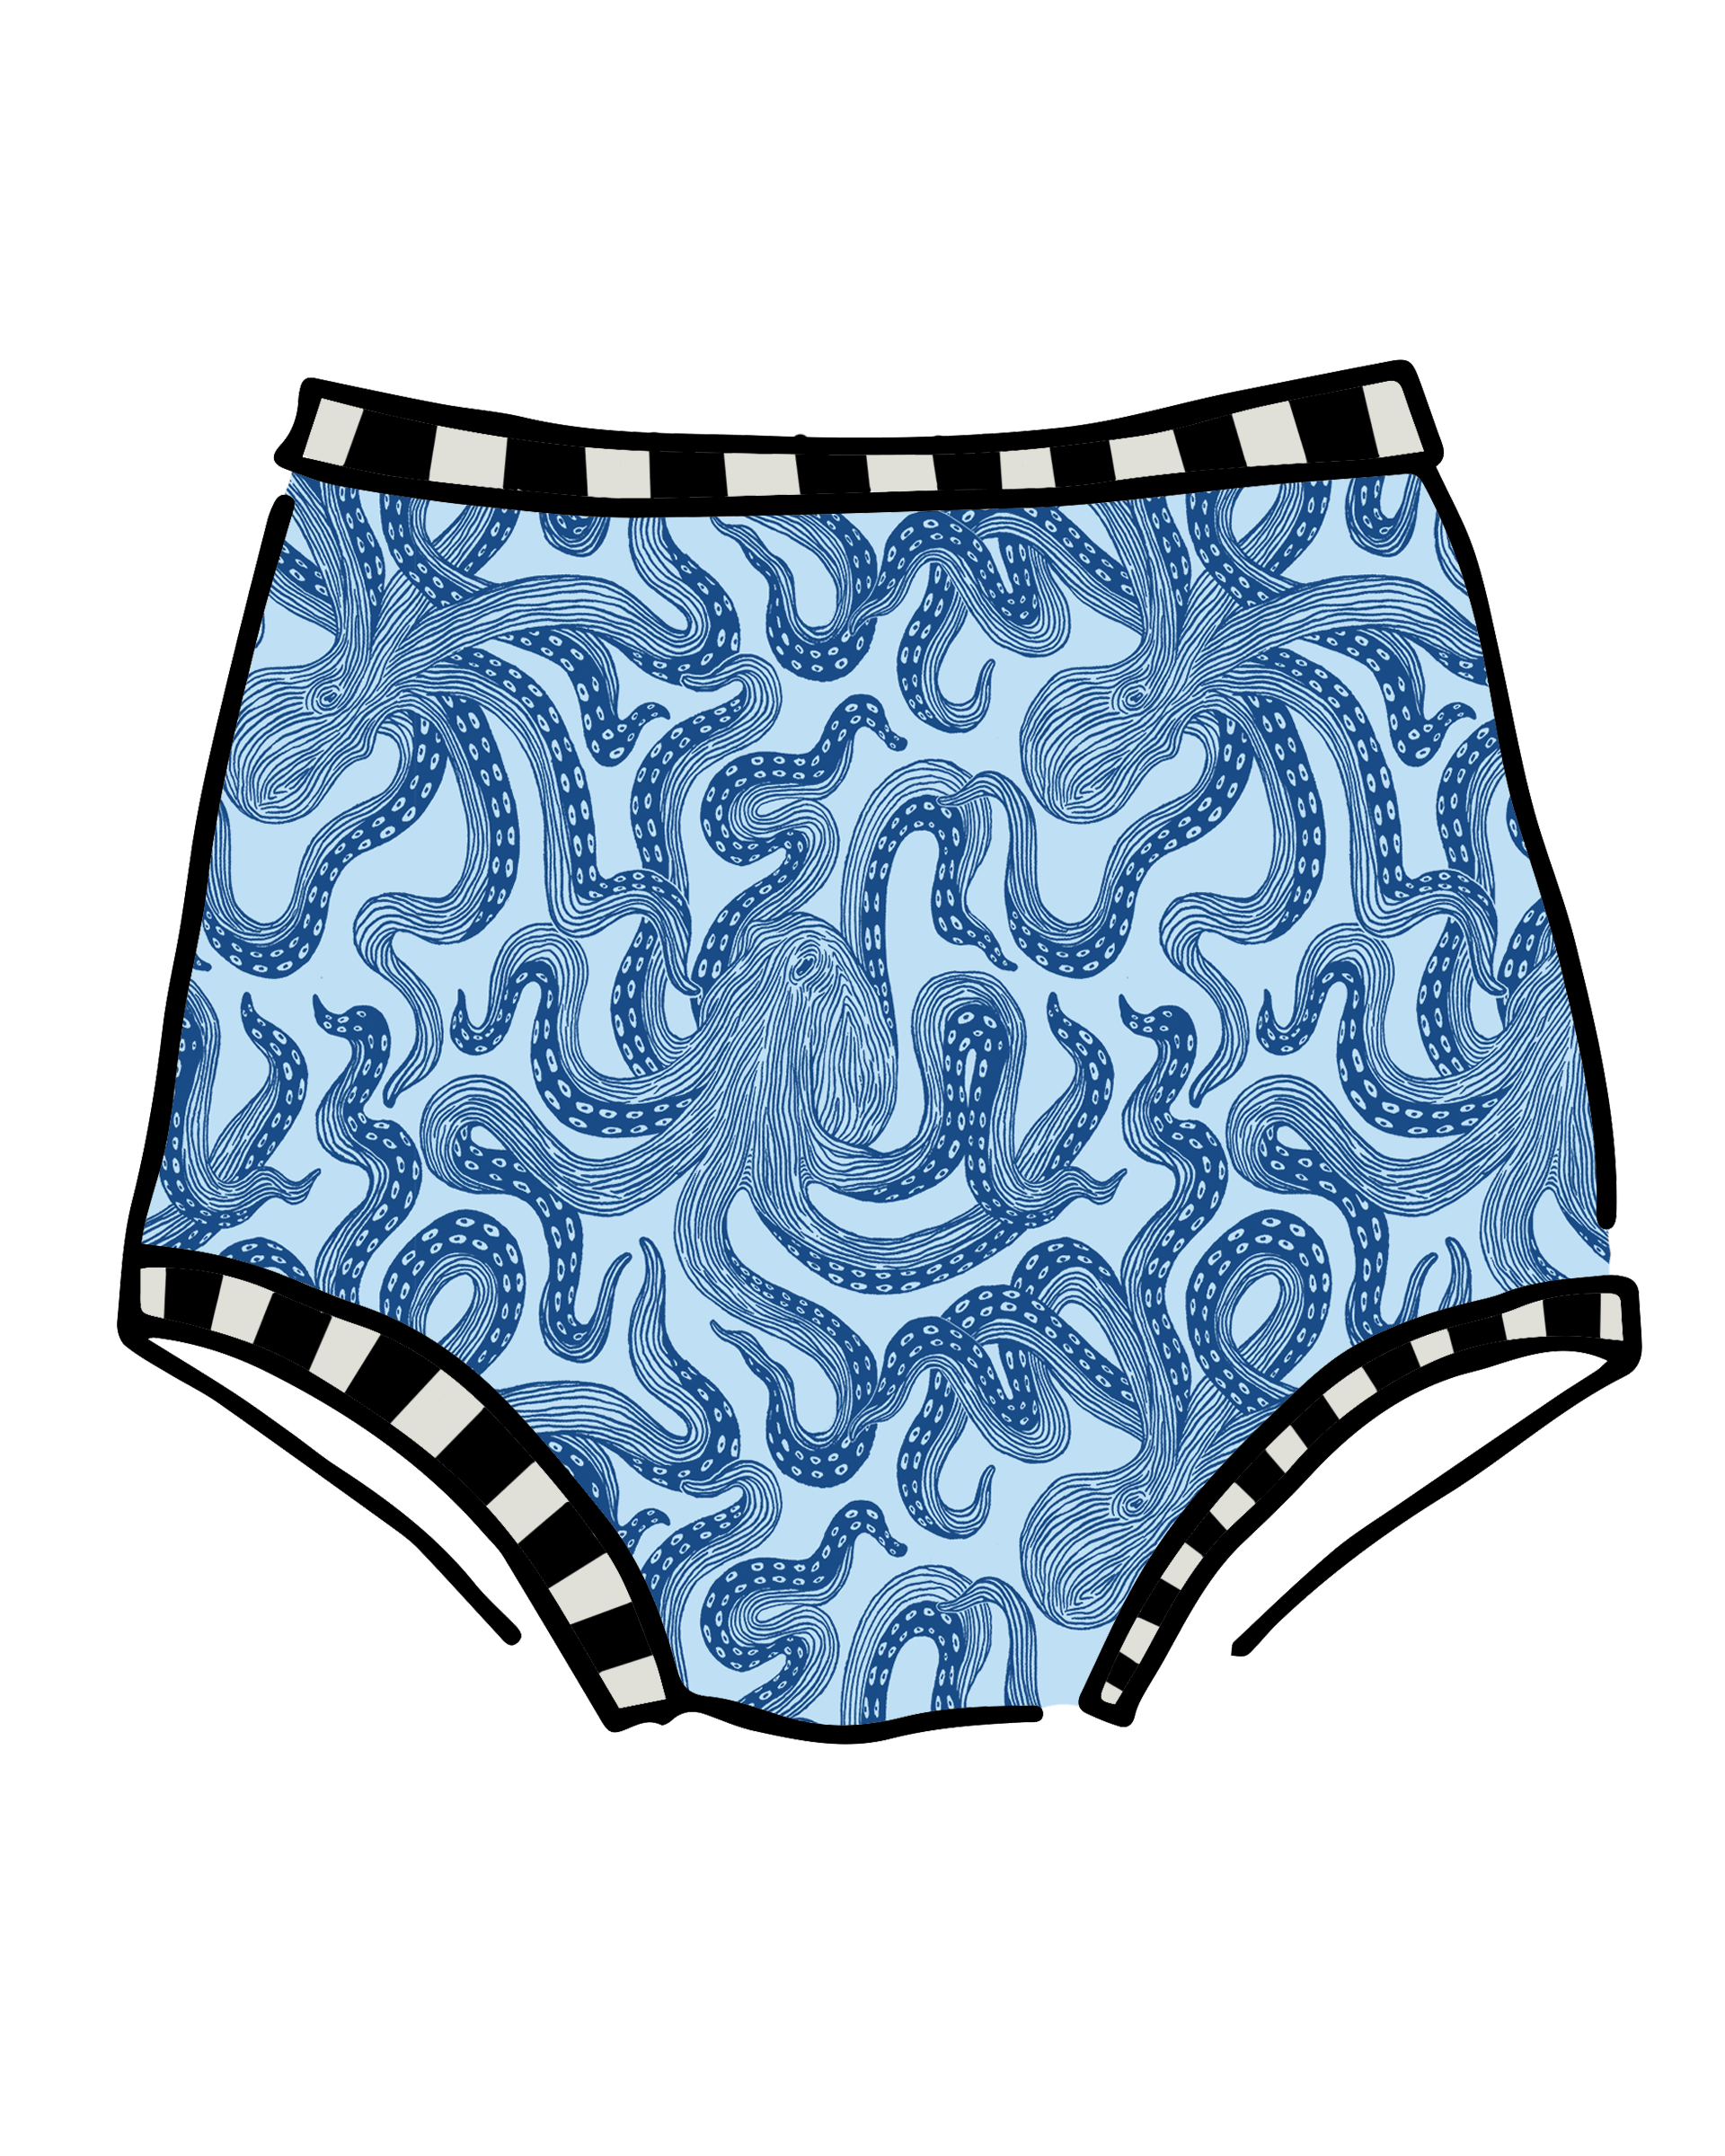 Drawing of Thunderpants Sky Rise style underwear in Octo-Pants print - dark blue octopus on light blue fabric.